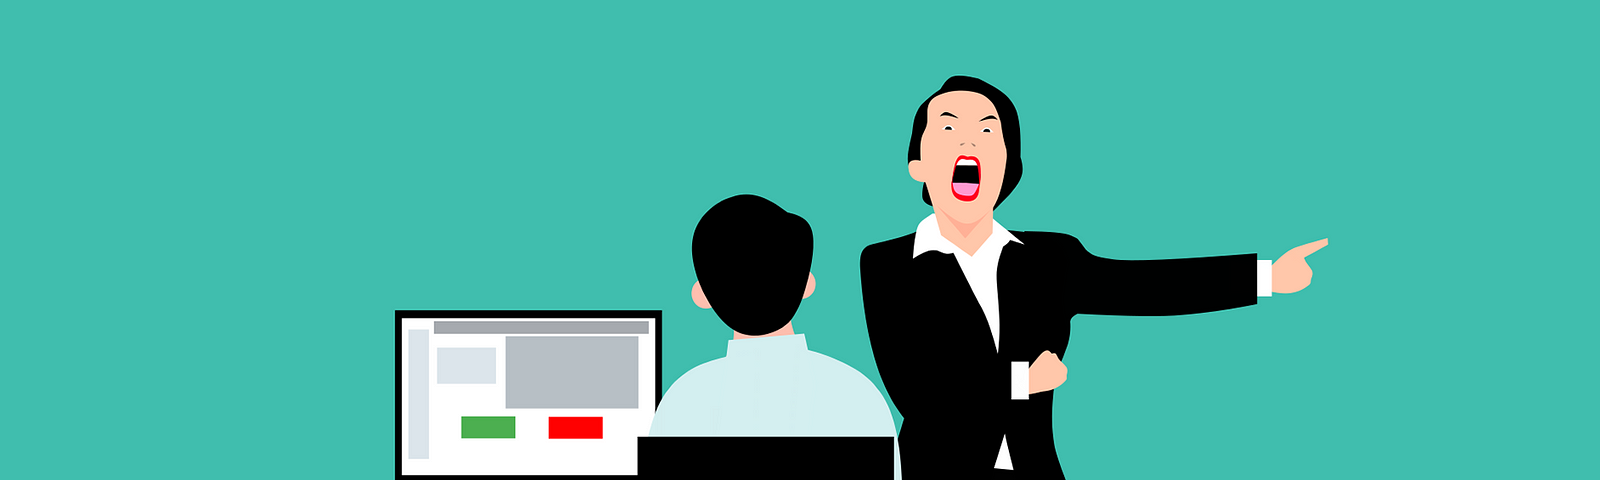 Illustration of female boss standing while facing a co-worker sitting down at desk and screaming at him